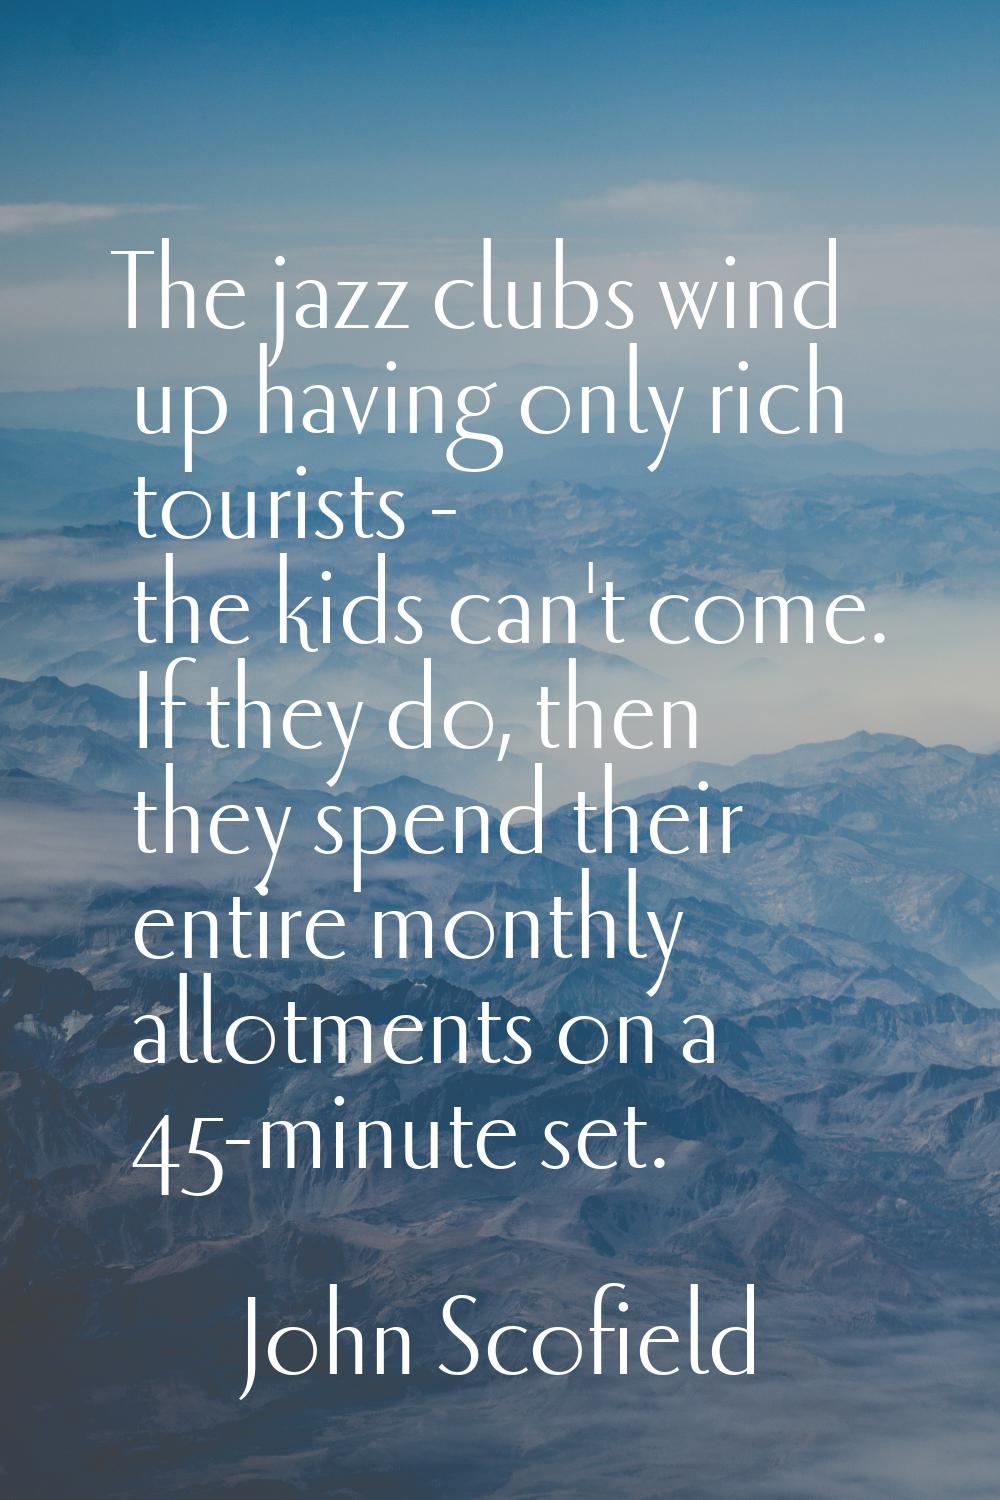 The jazz clubs wind up having only rich tourists - the kids can't come. If they do, then they spend